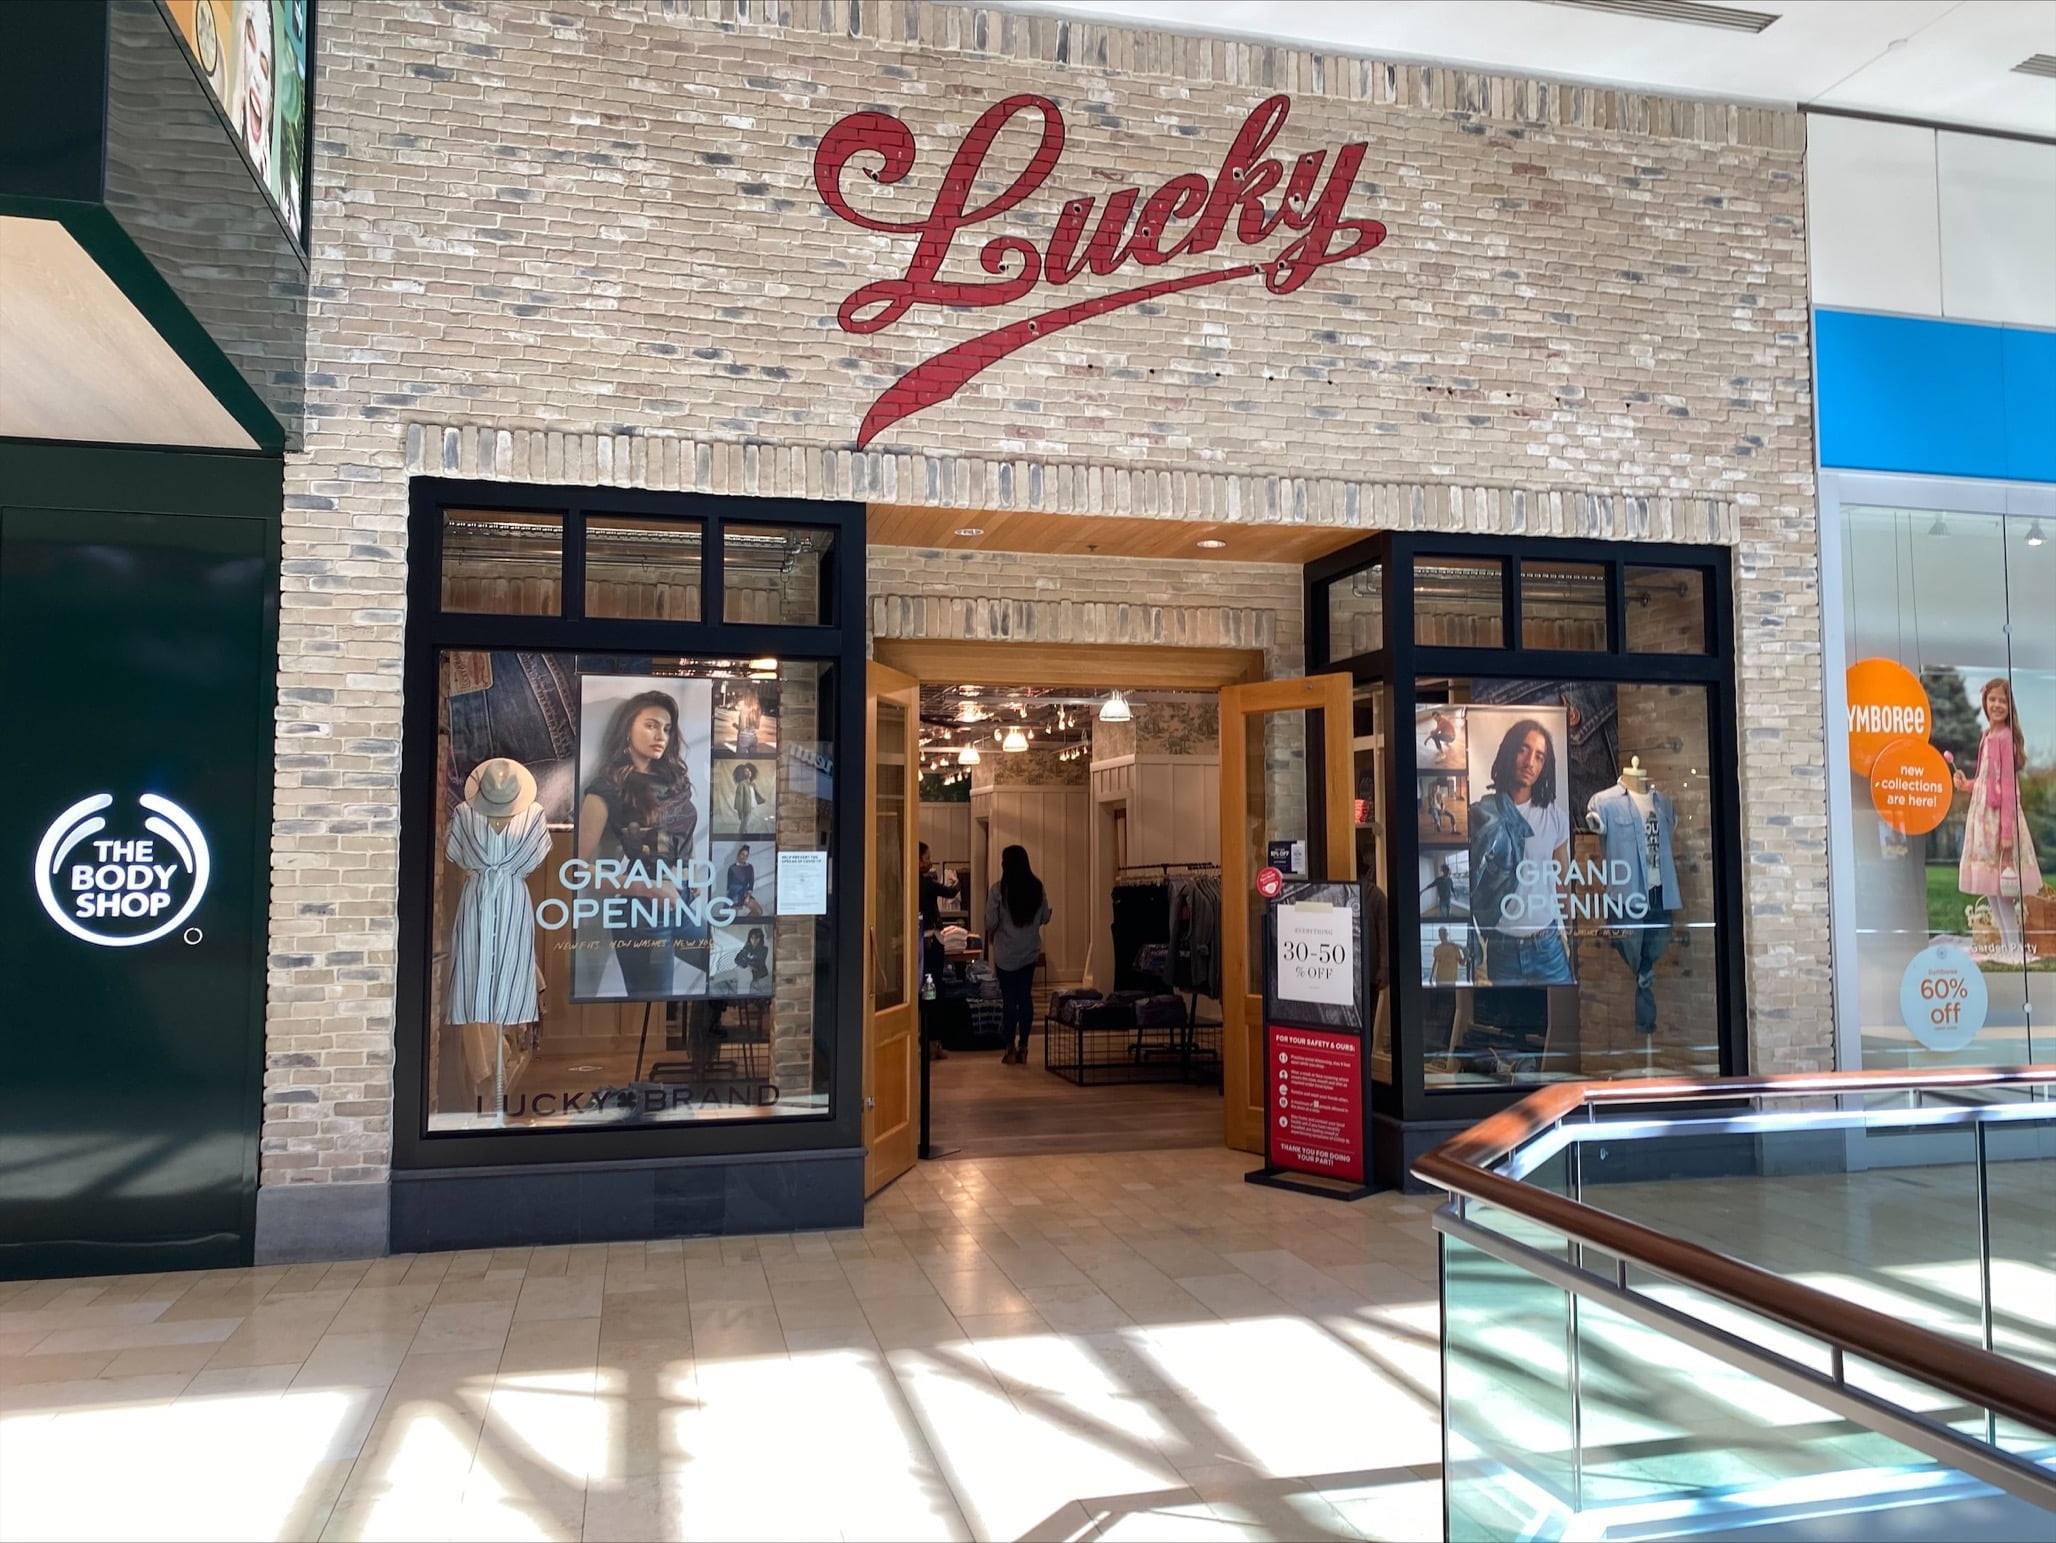 Lucky Brand Jeans Re-Enters Canada with Multiple Storefronts in Partnership  with Thriftys: Interview